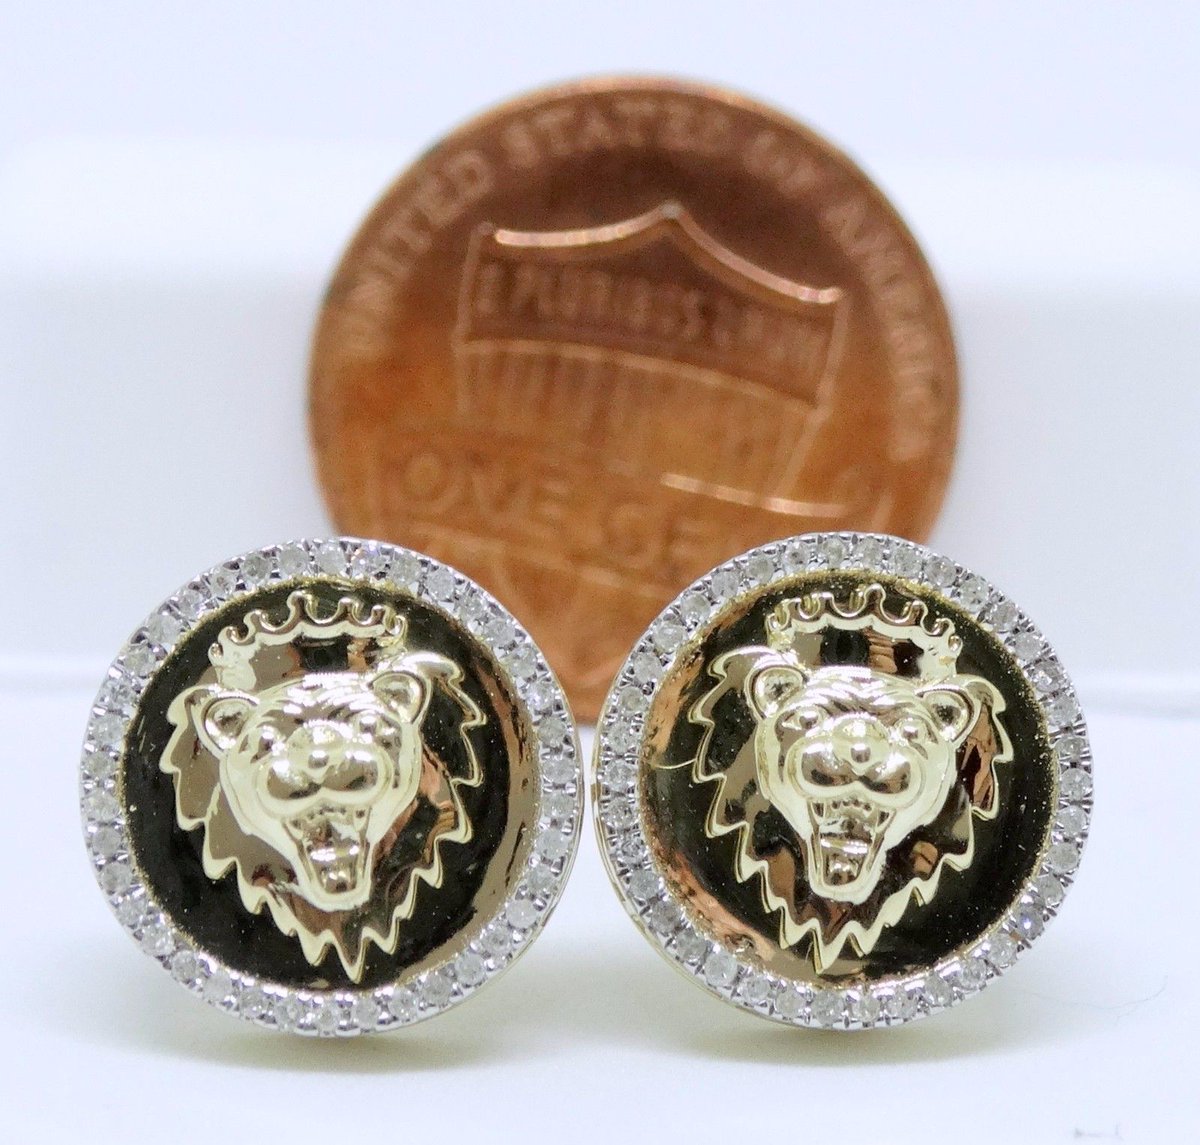 #Simple and #stylish, these #stud #earrings are a #great #everyday #look. #Fashioned in #10kt #Yellow #gold, each #Round shaped #earring is centered with a #cluster of #shimmering #diamonds #totaling 0.17 ct.
#lion #lionearrings #studearring #yellowgold
bit.ly/2Lu9yjH